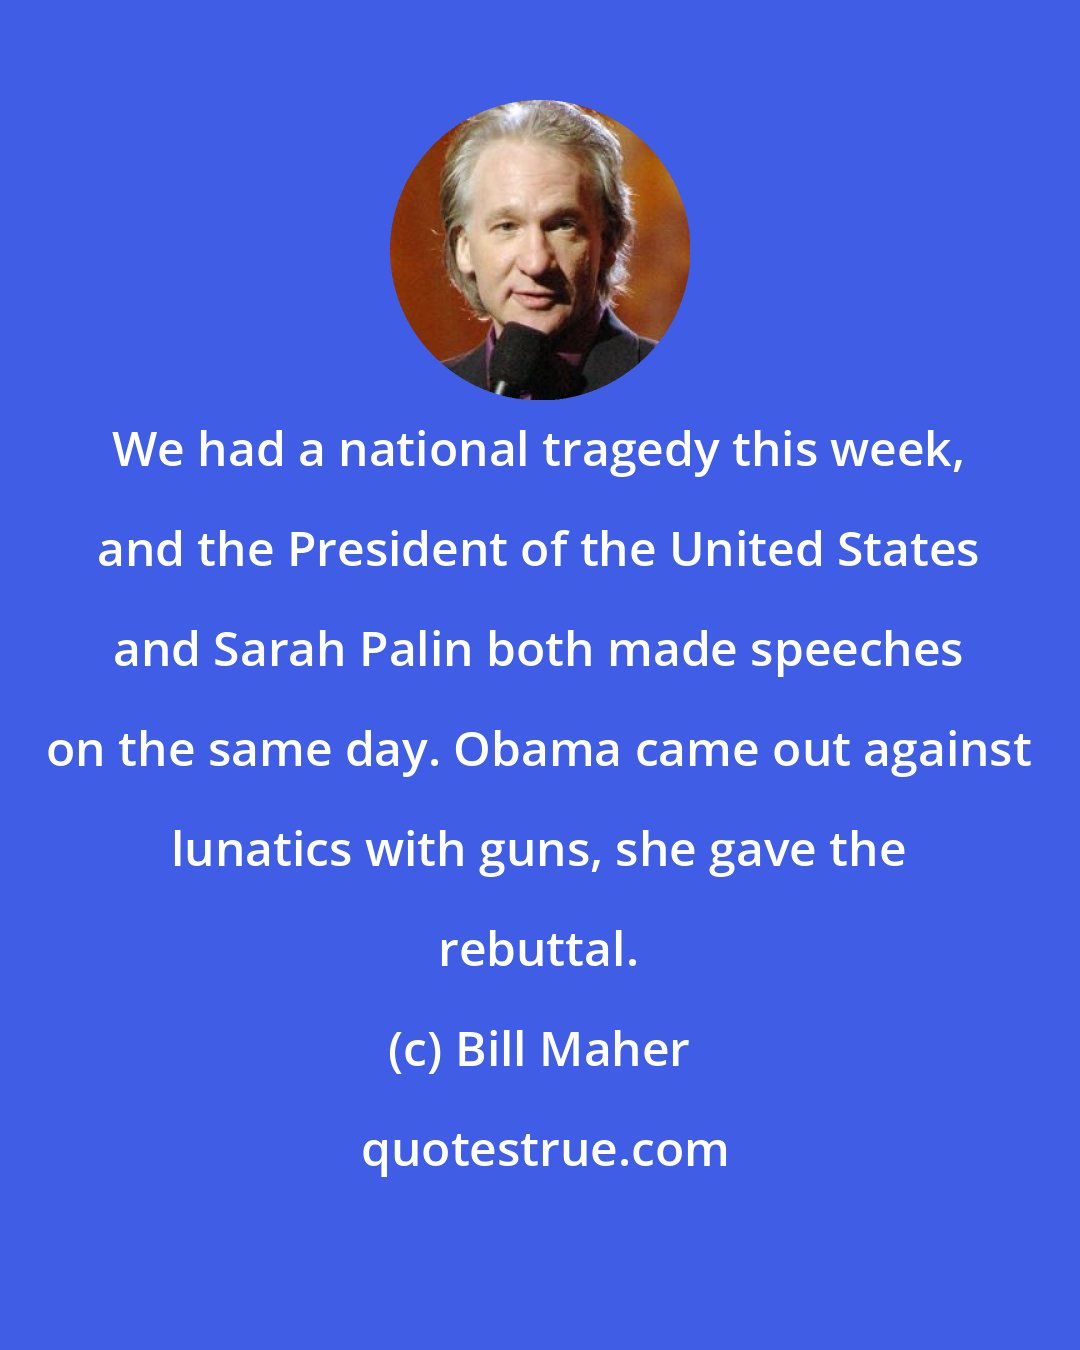 Bill Maher: We had a national tragedy this week, and the President of the United States and Sarah Palin both made speeches on the same day. Obama came out against lunatics with guns, she gave the rebuttal.